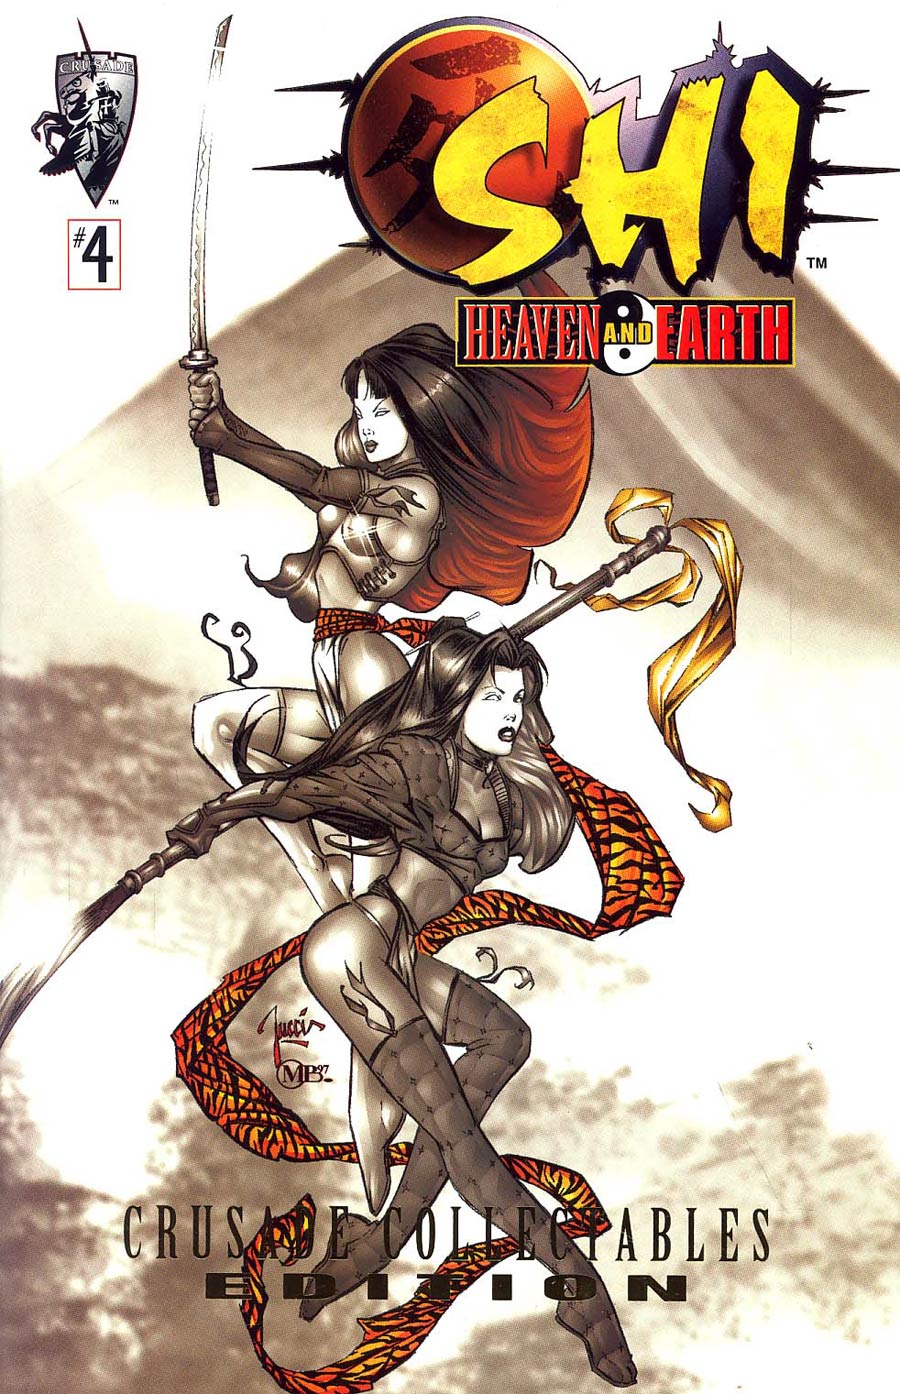 Shi Heaven And Earth #4 Cover C Crusade Collectibles Edition